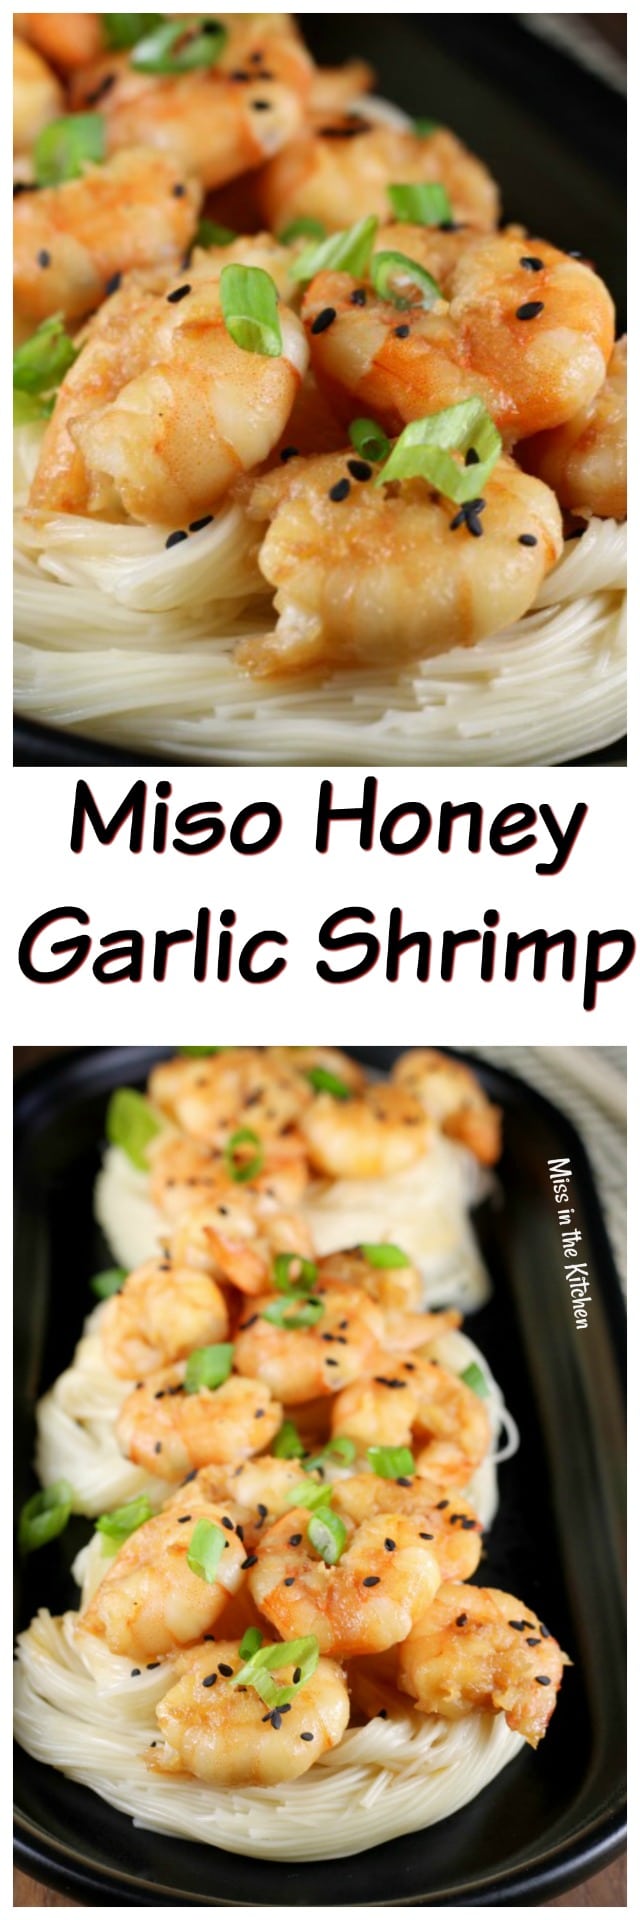 Miso Honey Garlic Shrimp Recipe ~ Simple dinner that is perfect for entertaining and easy enough for any night of the week. #AD #HemisFares @Kroger